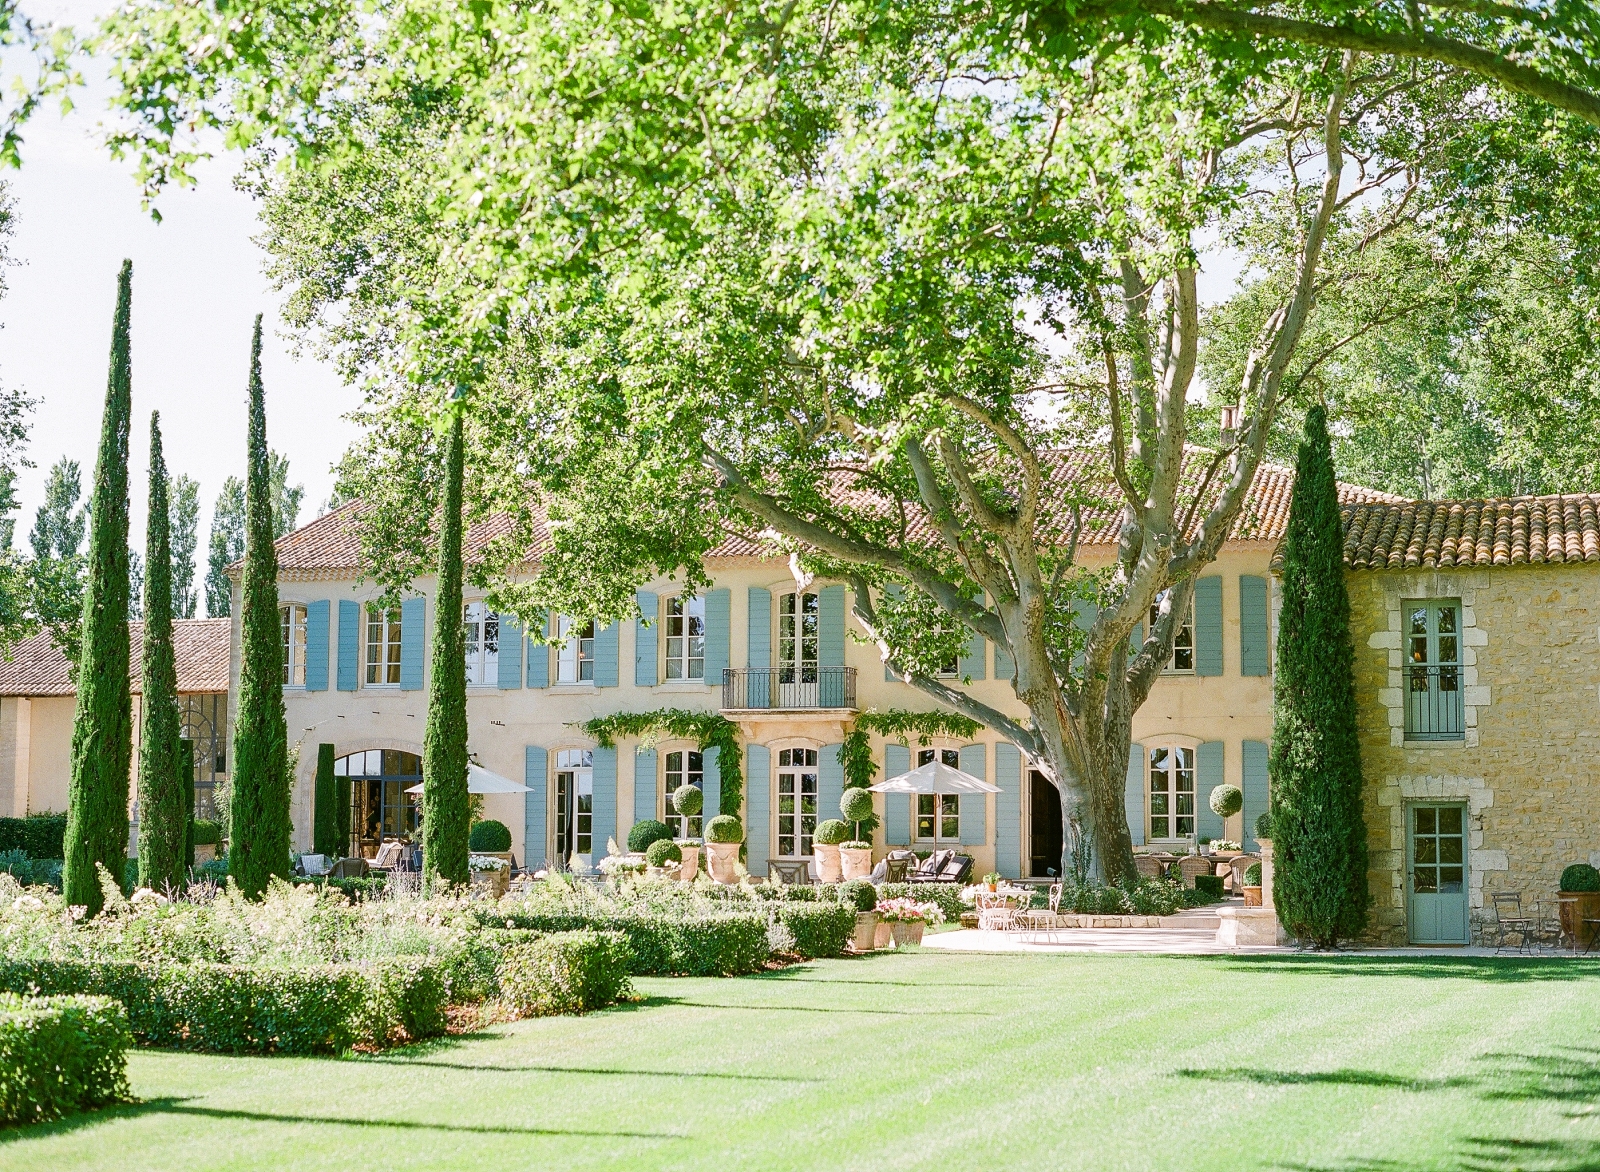 Garden with hedges, lawn, trees next to patio with umbrellas and sunloungers at Mas de la Motte in Provence, France